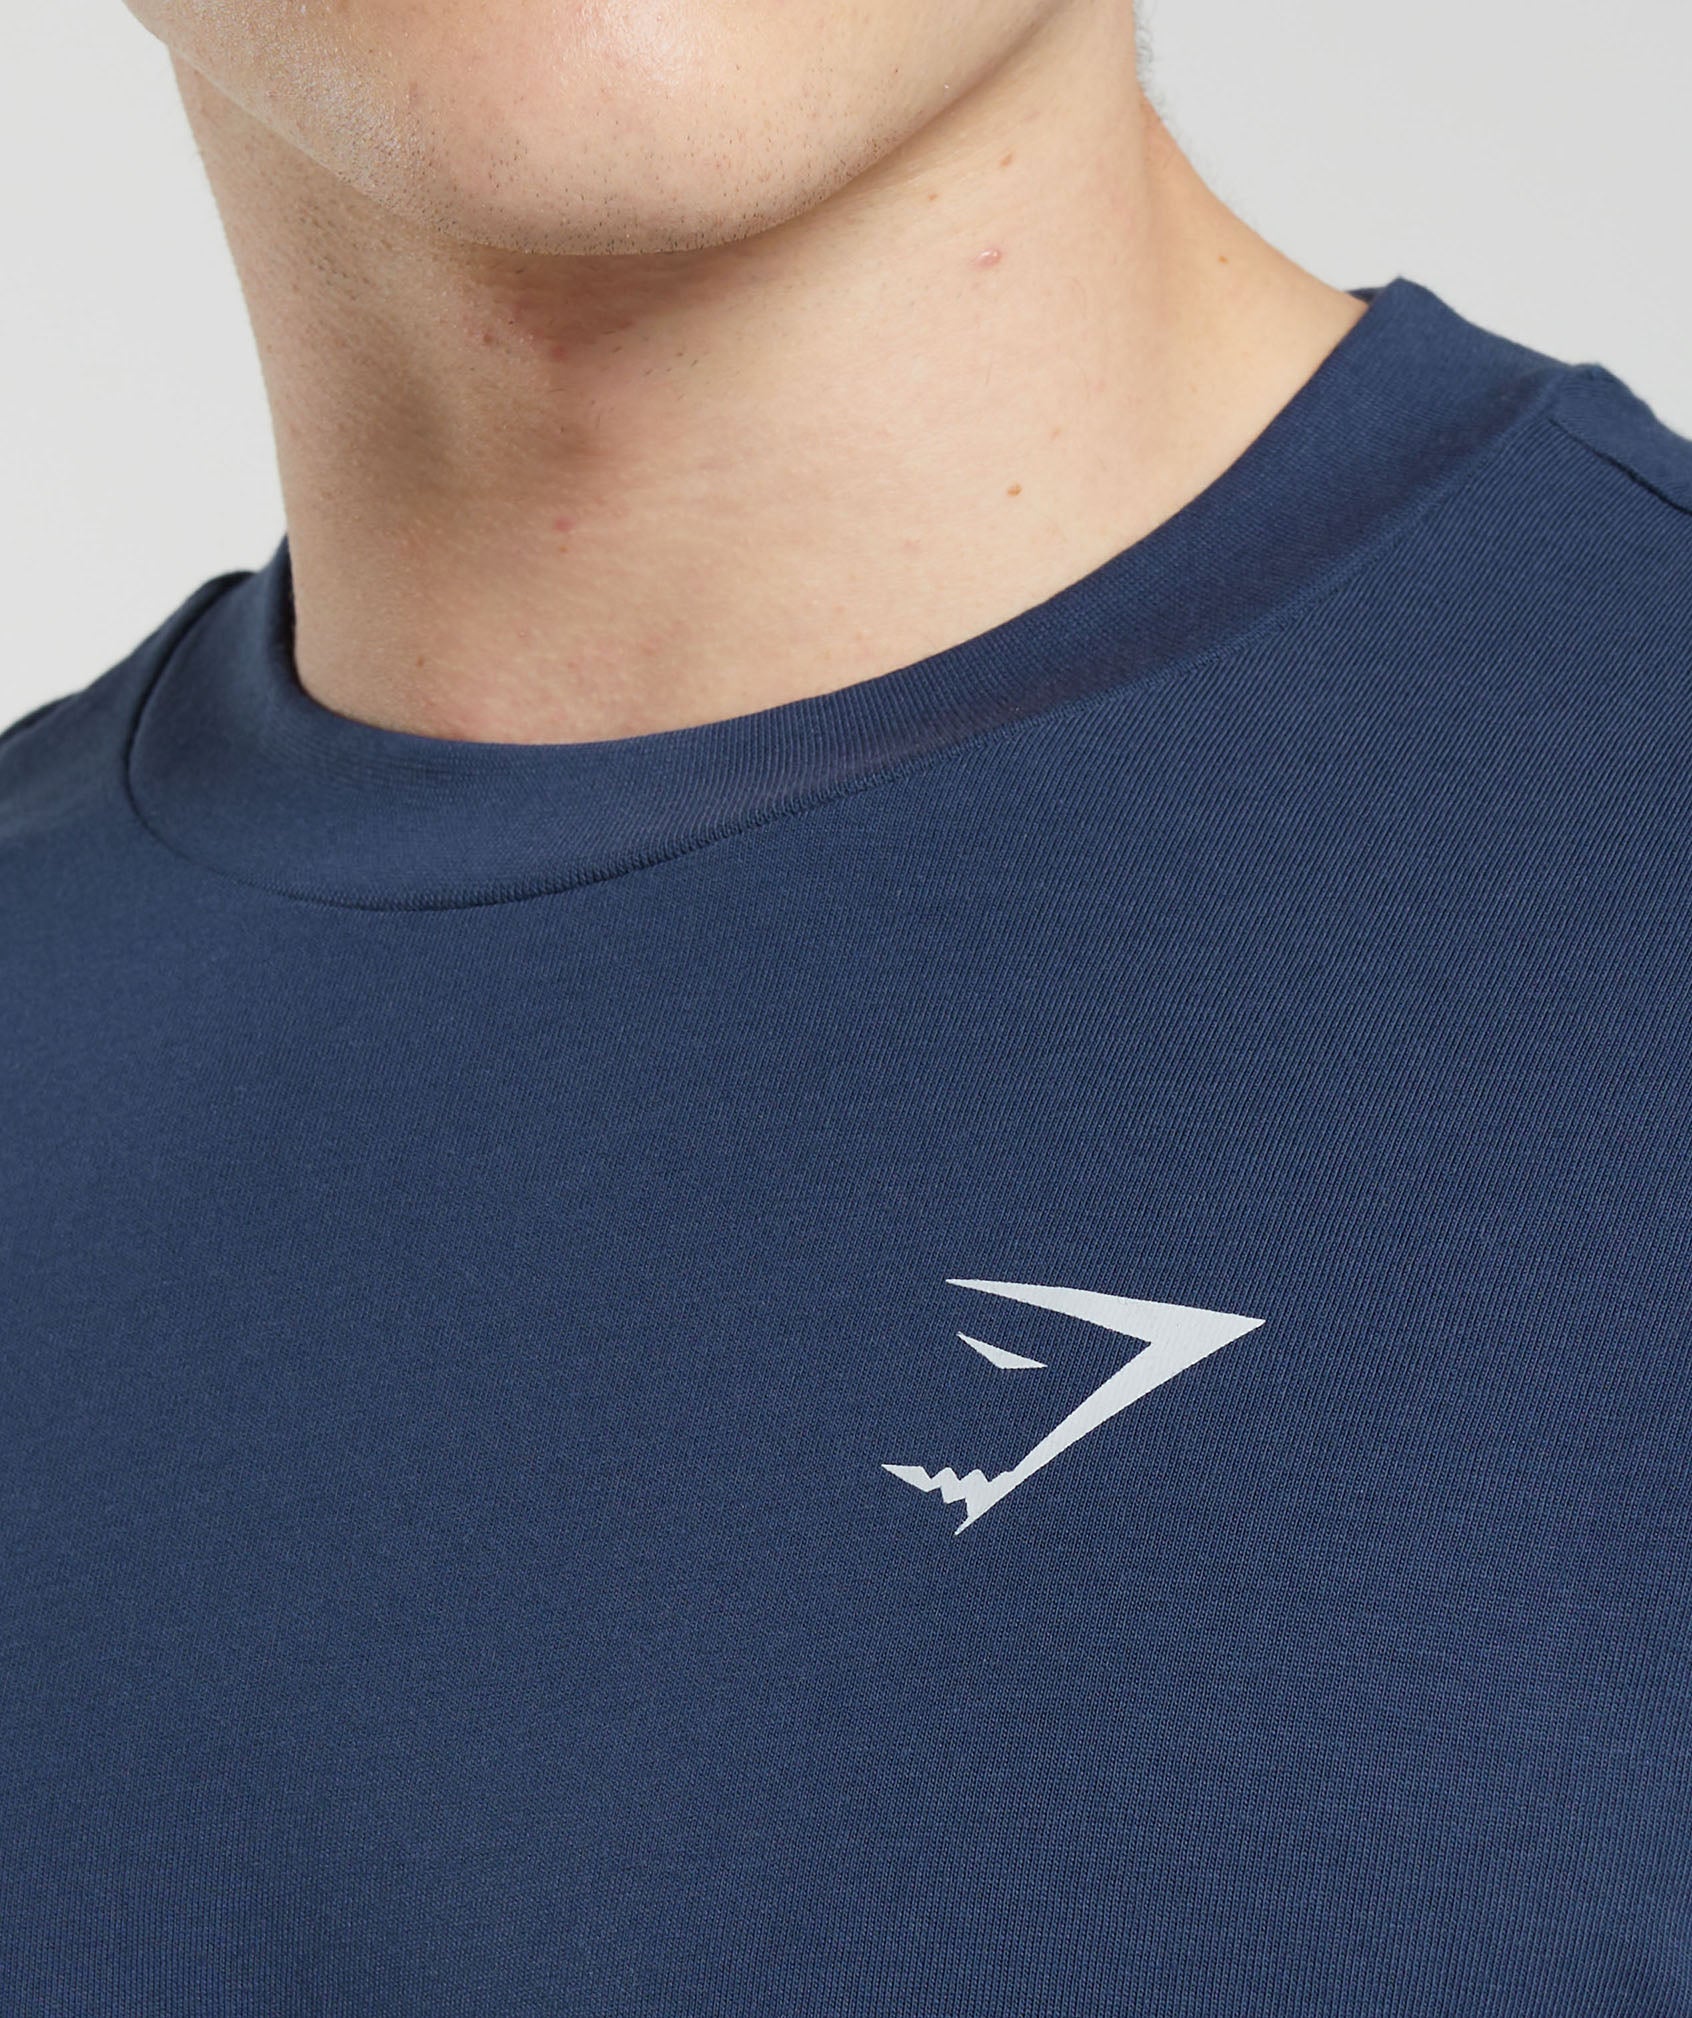 Weightlifting Club T-Shirt in Ash Blue - view 5